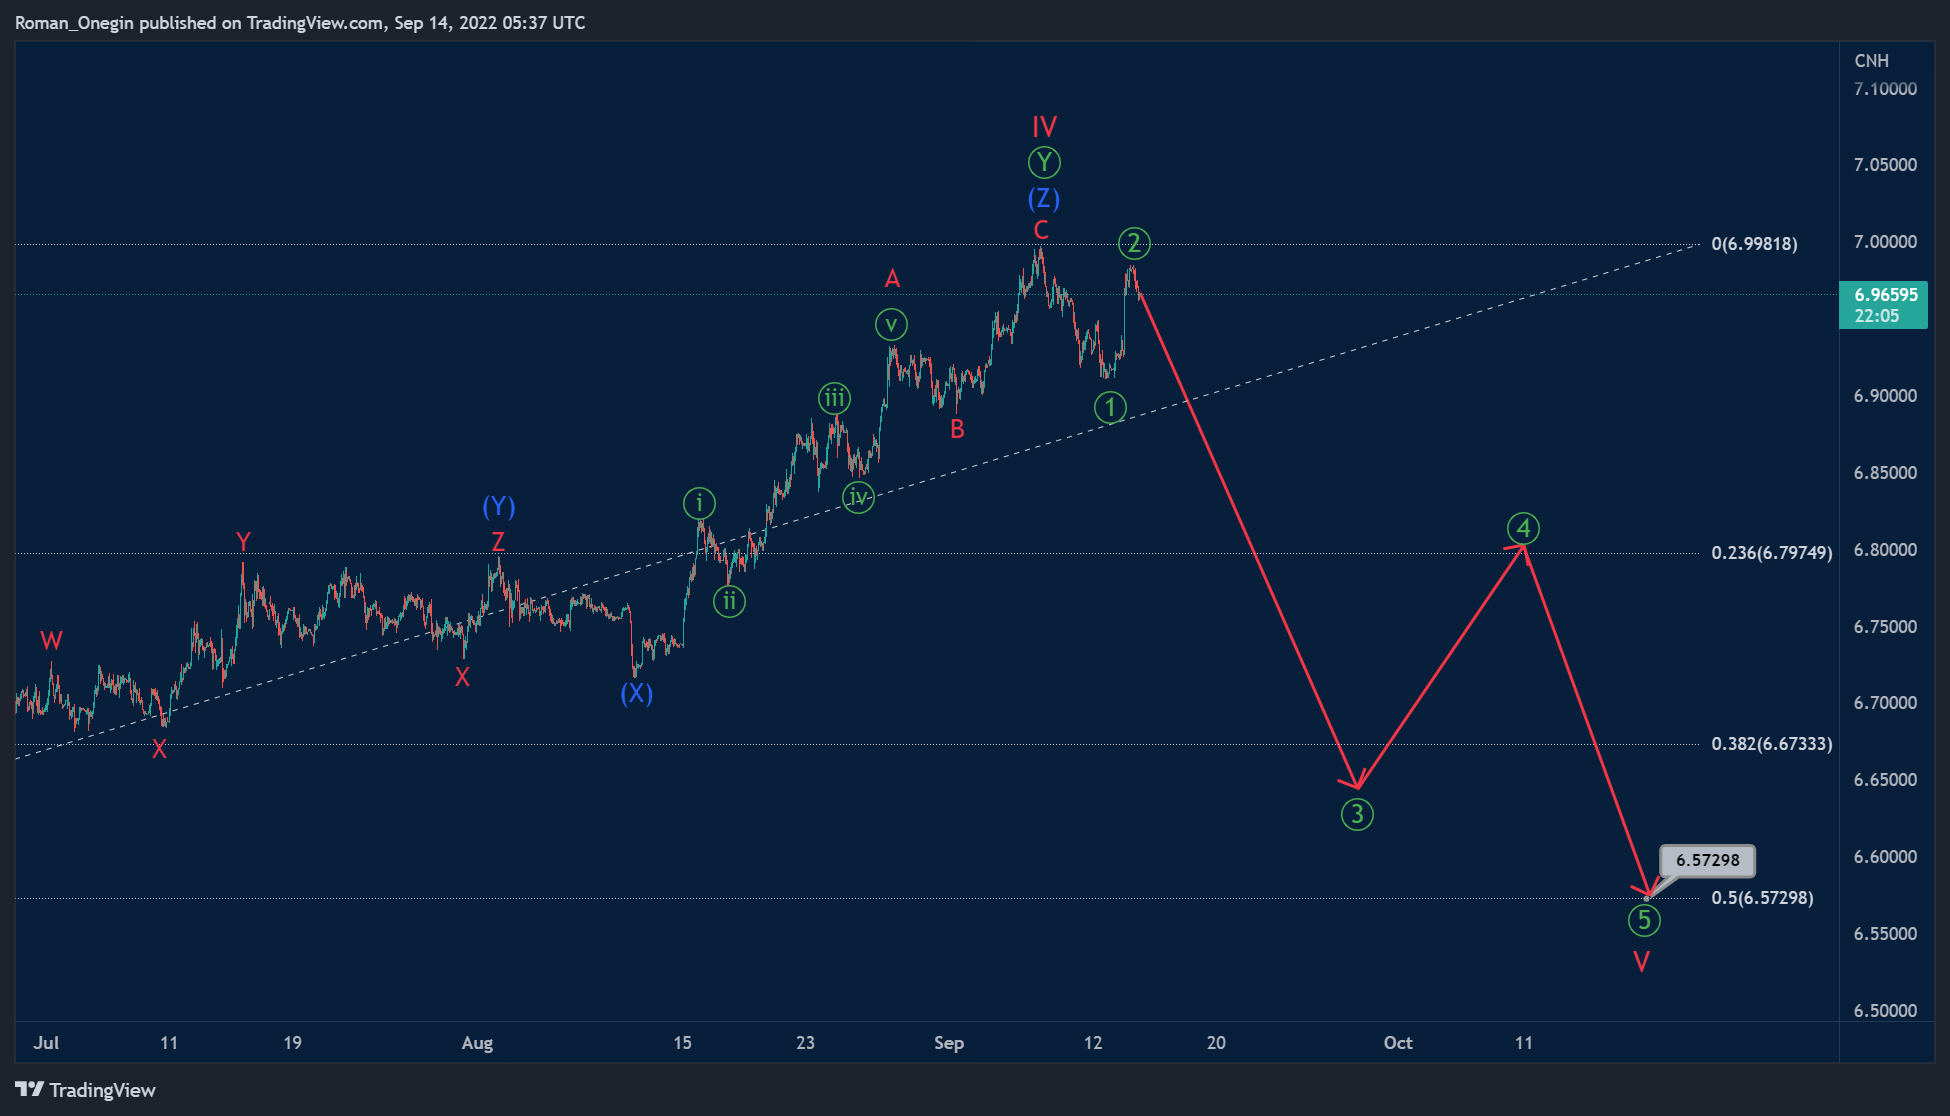 The current formation of the USDCNH shows the primary zigzag pattern â’¶-â’·-â’¸, which in the long term seems to be forming a large correction IV of the cycle degree. This pattern today looks completed in two parts out of three - 2